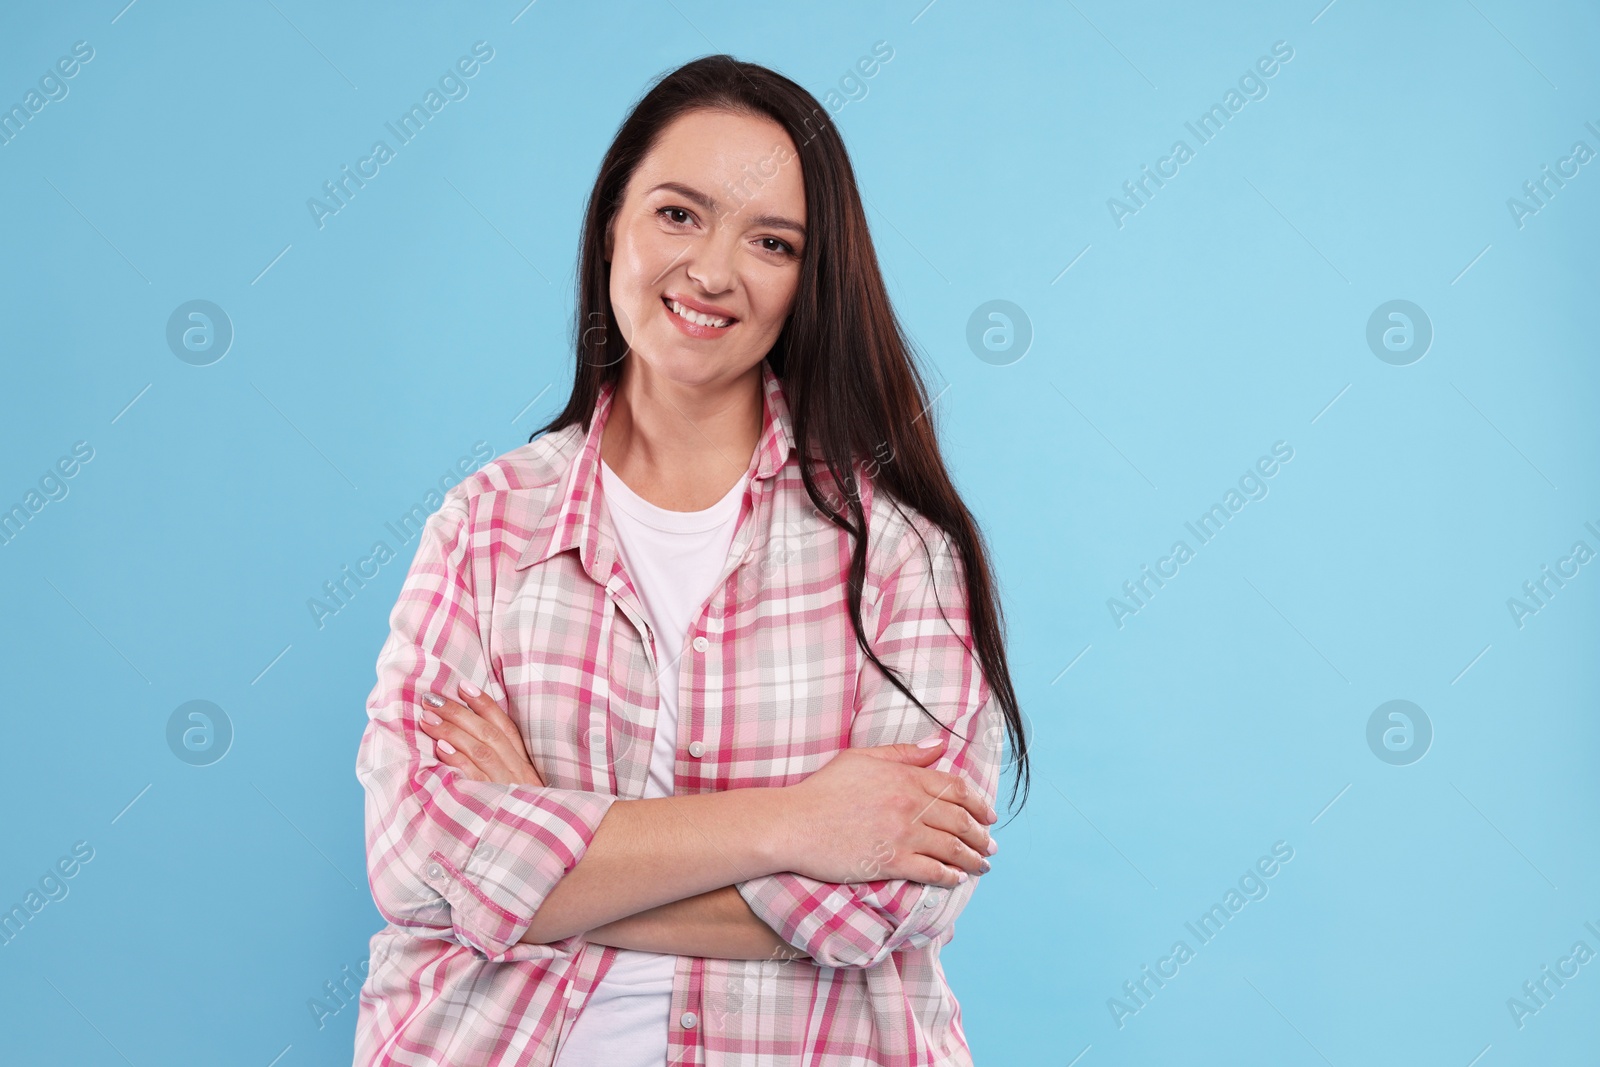 Photo of Beautiful overweight woman with charming smile on turquoise background